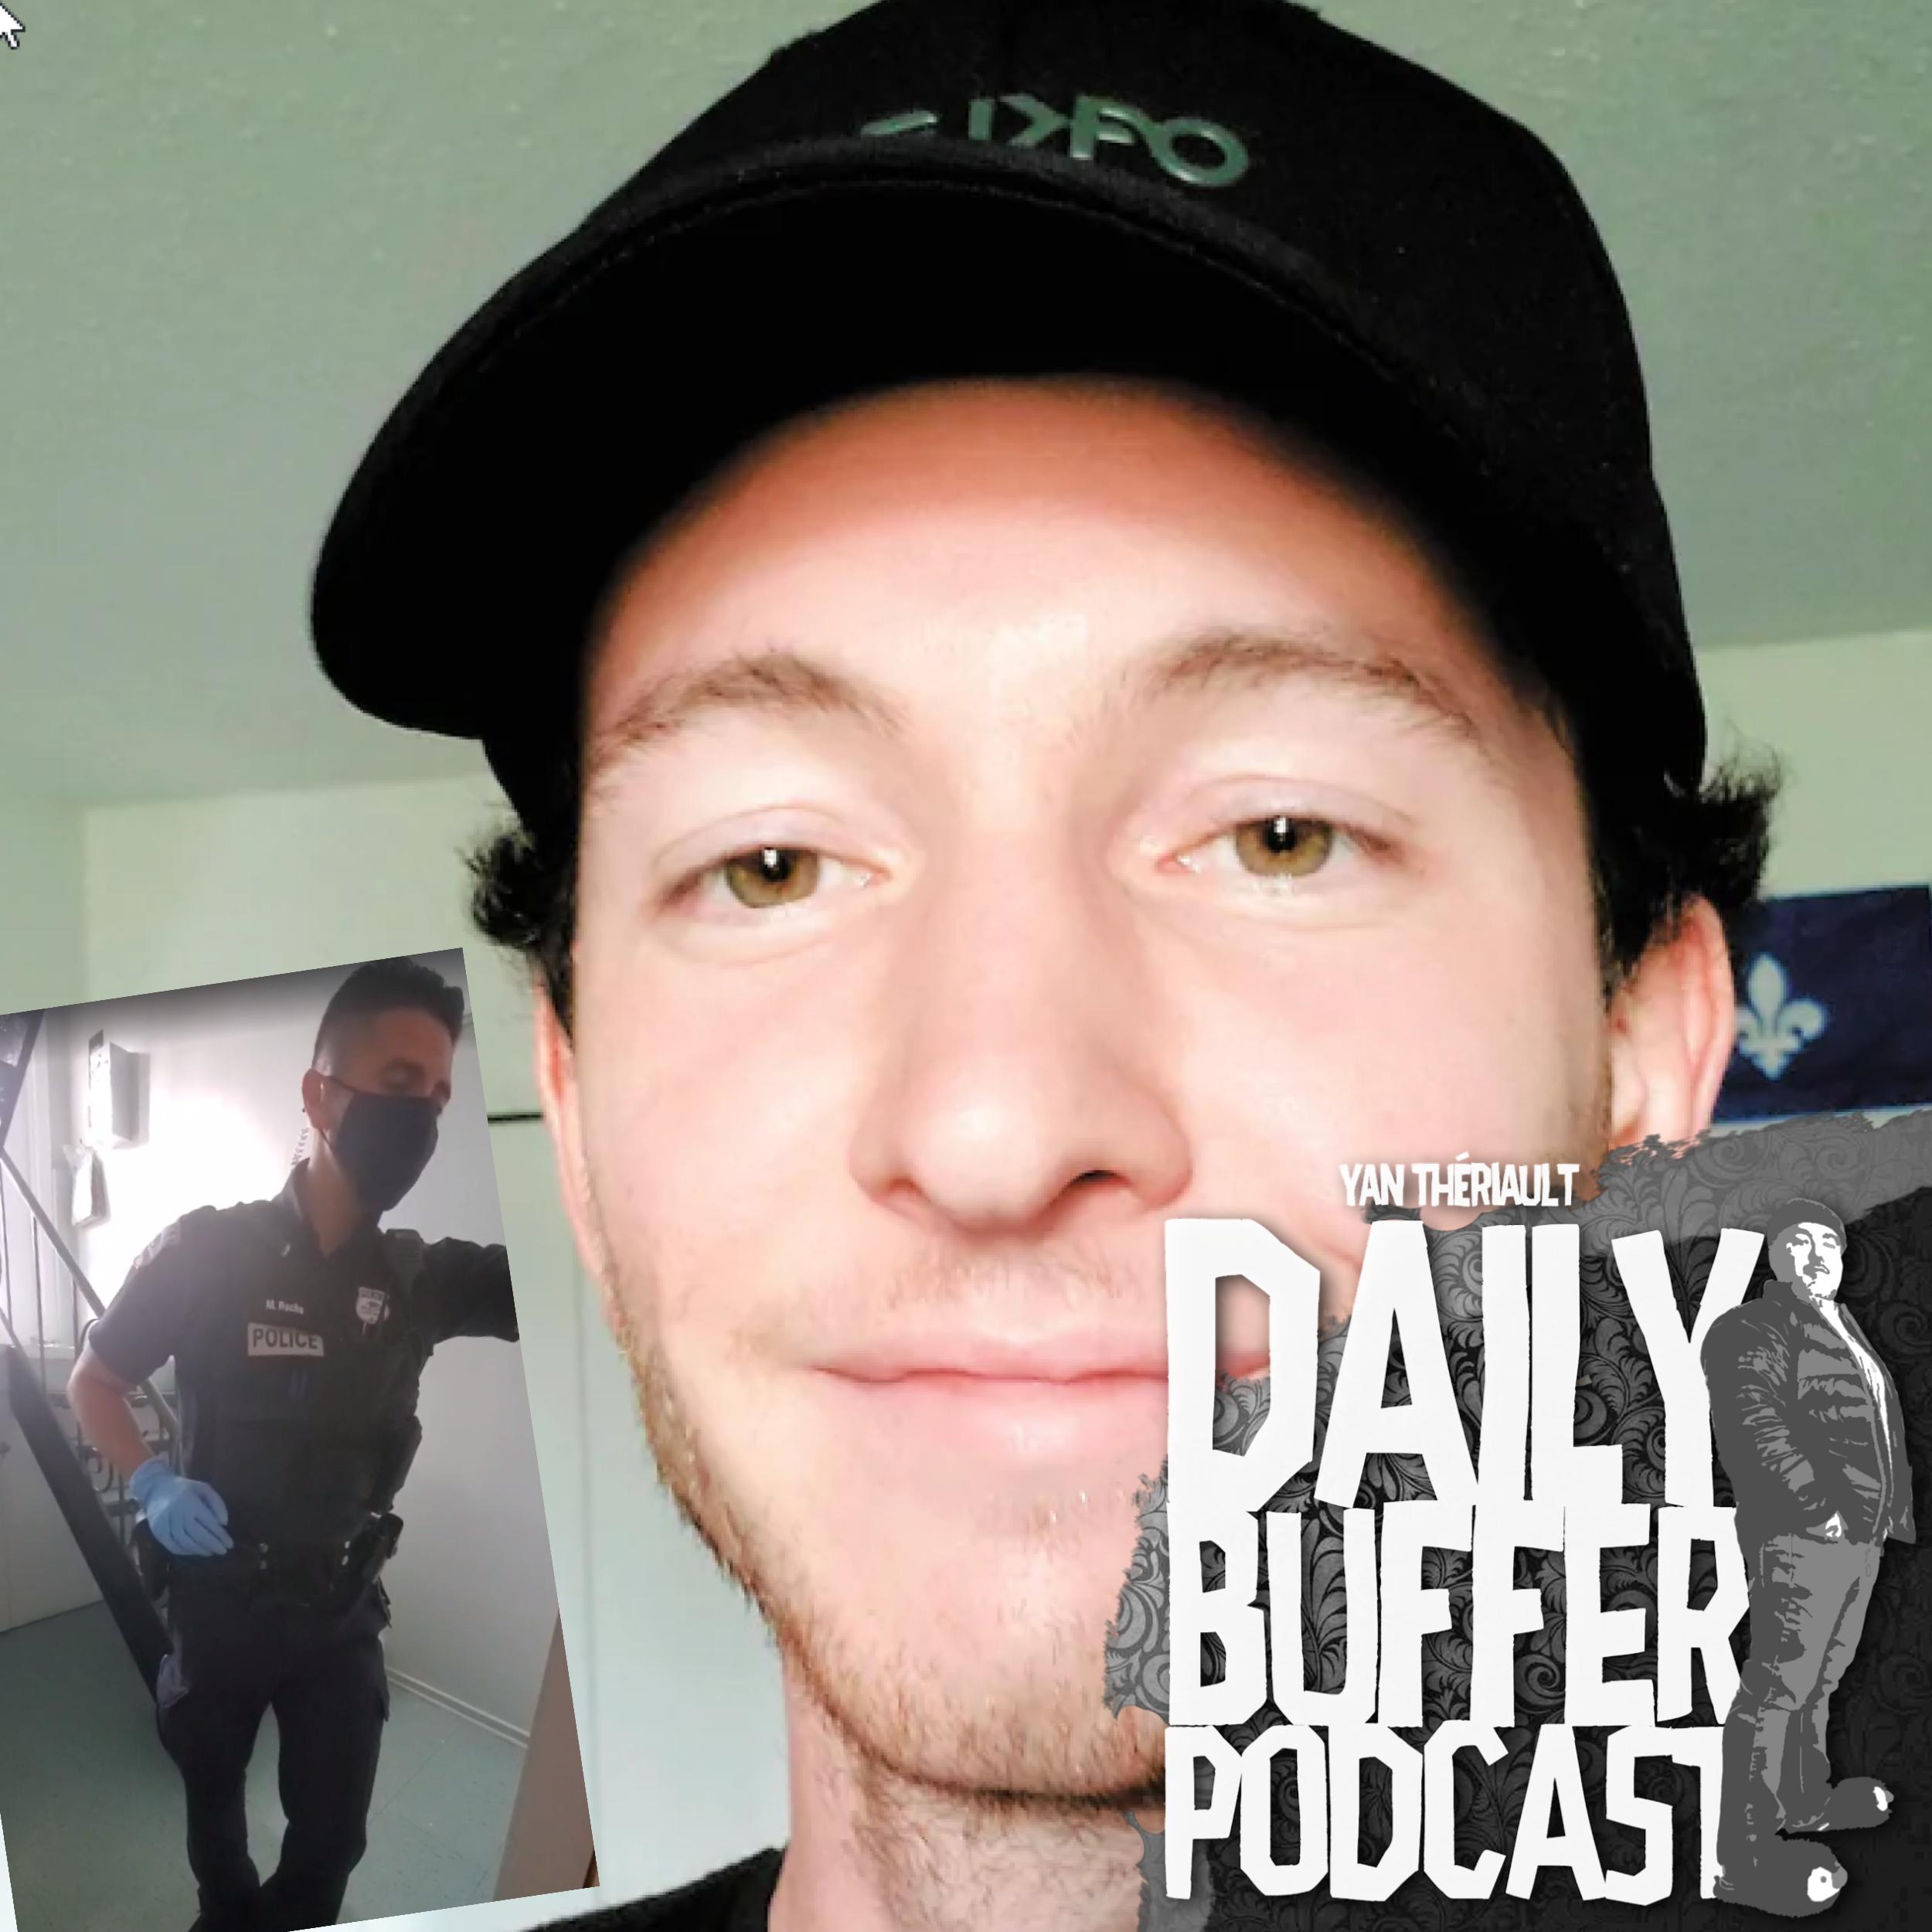 Kevin vs les polices - Le Daily Buffer Podcast - 2020 08 02